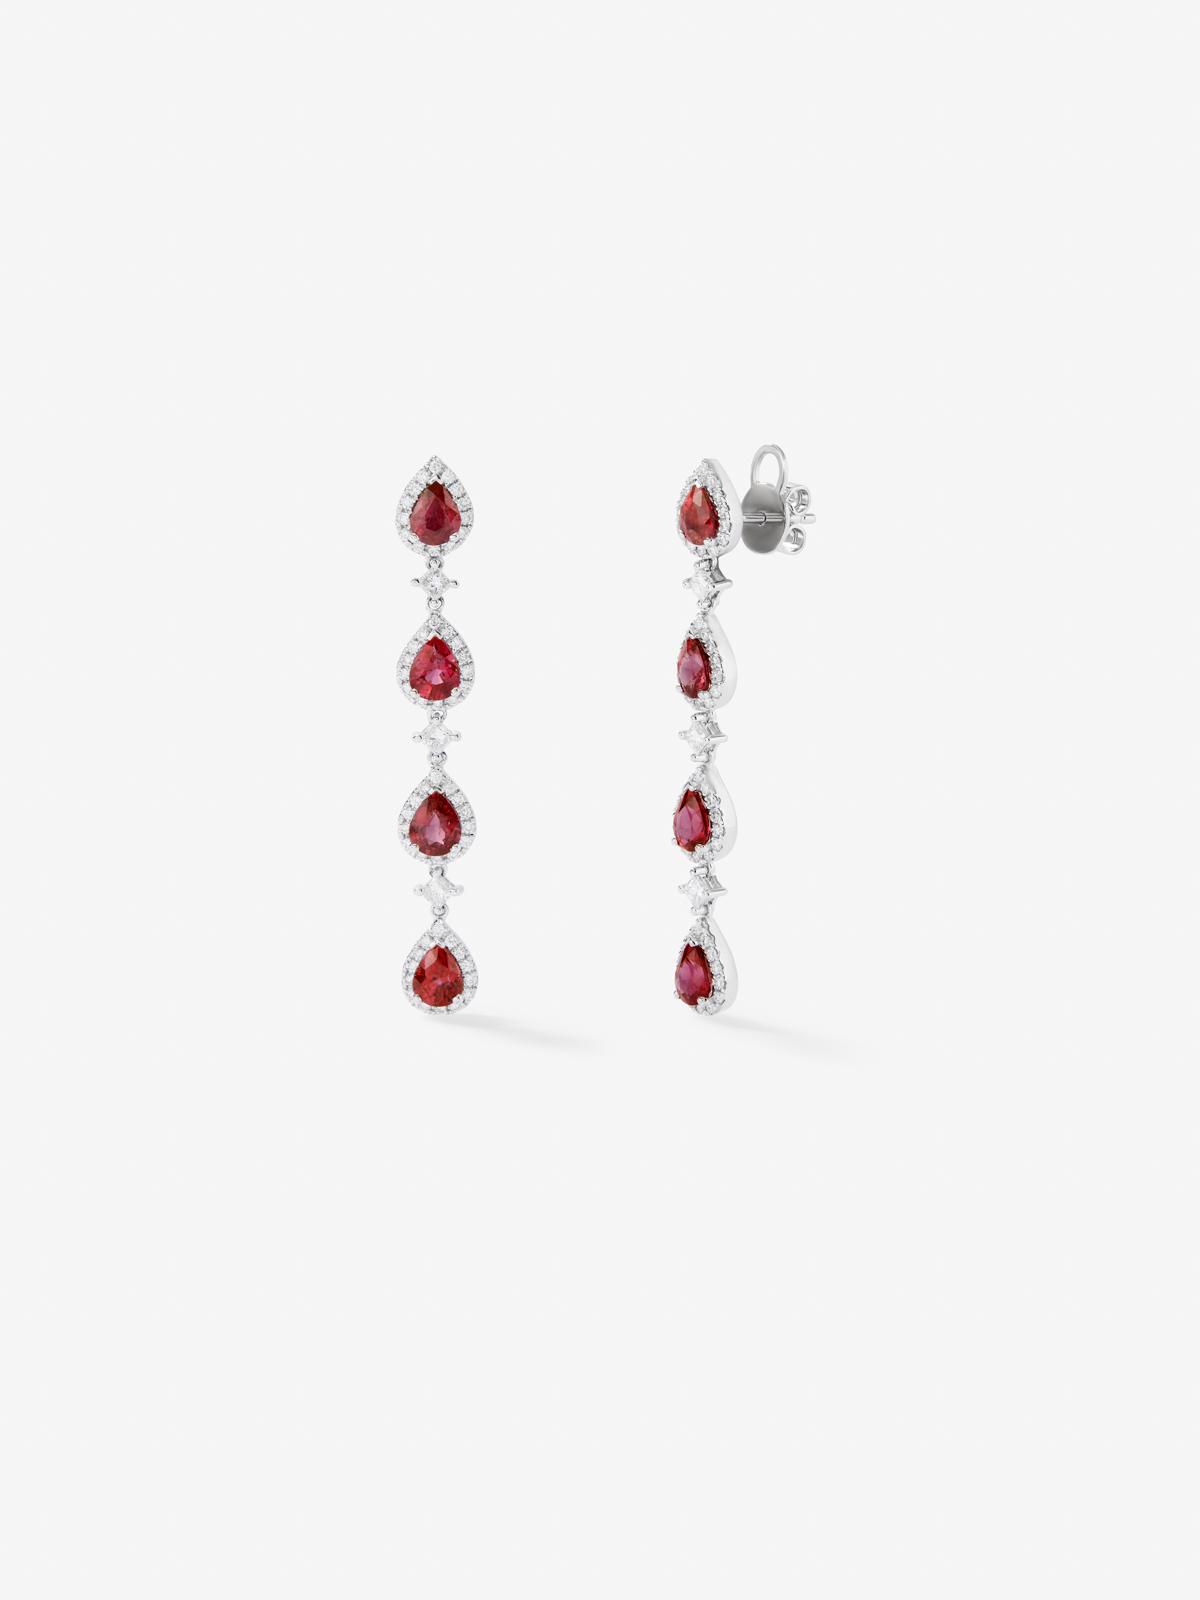 18k white gold earrings with red rubies in pear size 2.86 cts and white diamonds in bright size and 0.73 cts princess